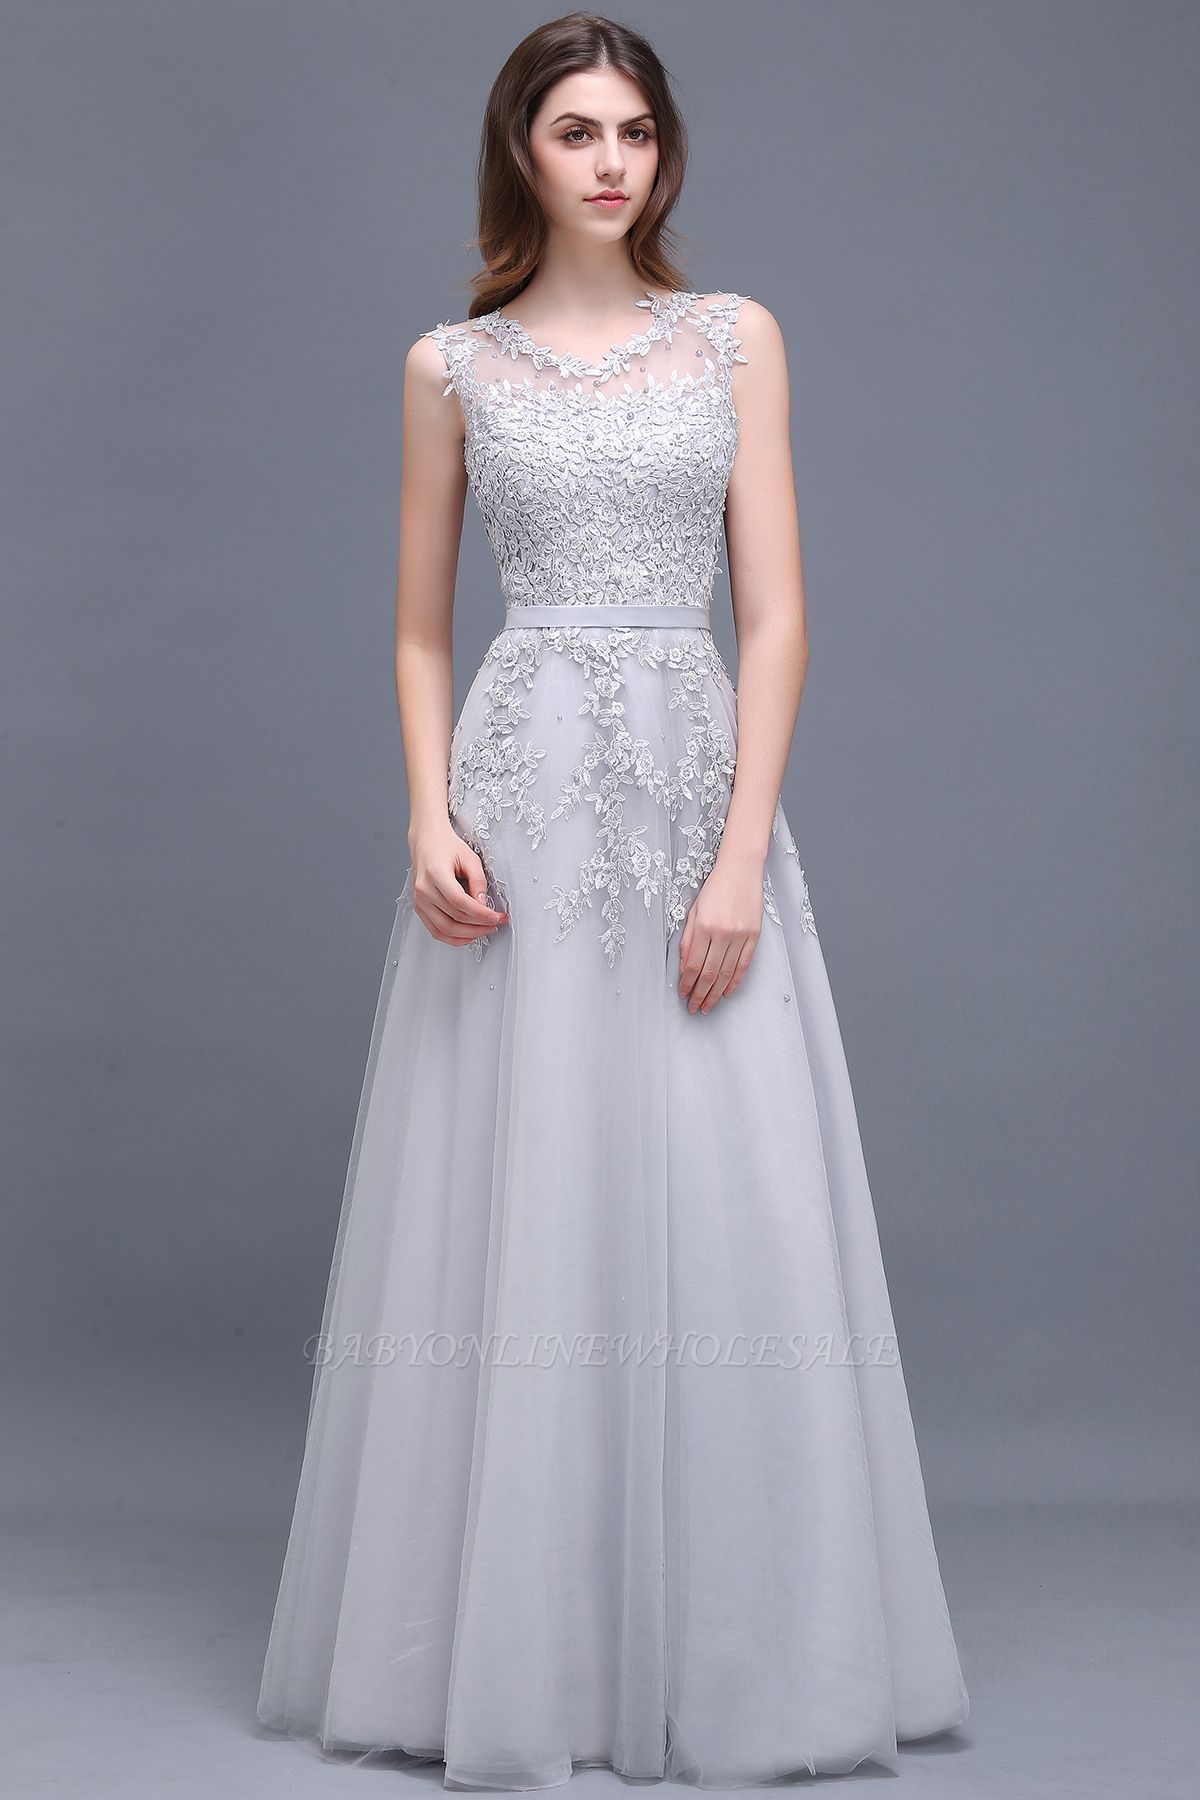 ADDILYN | A-line Floor-length Tulle Prom Dress with Appliques